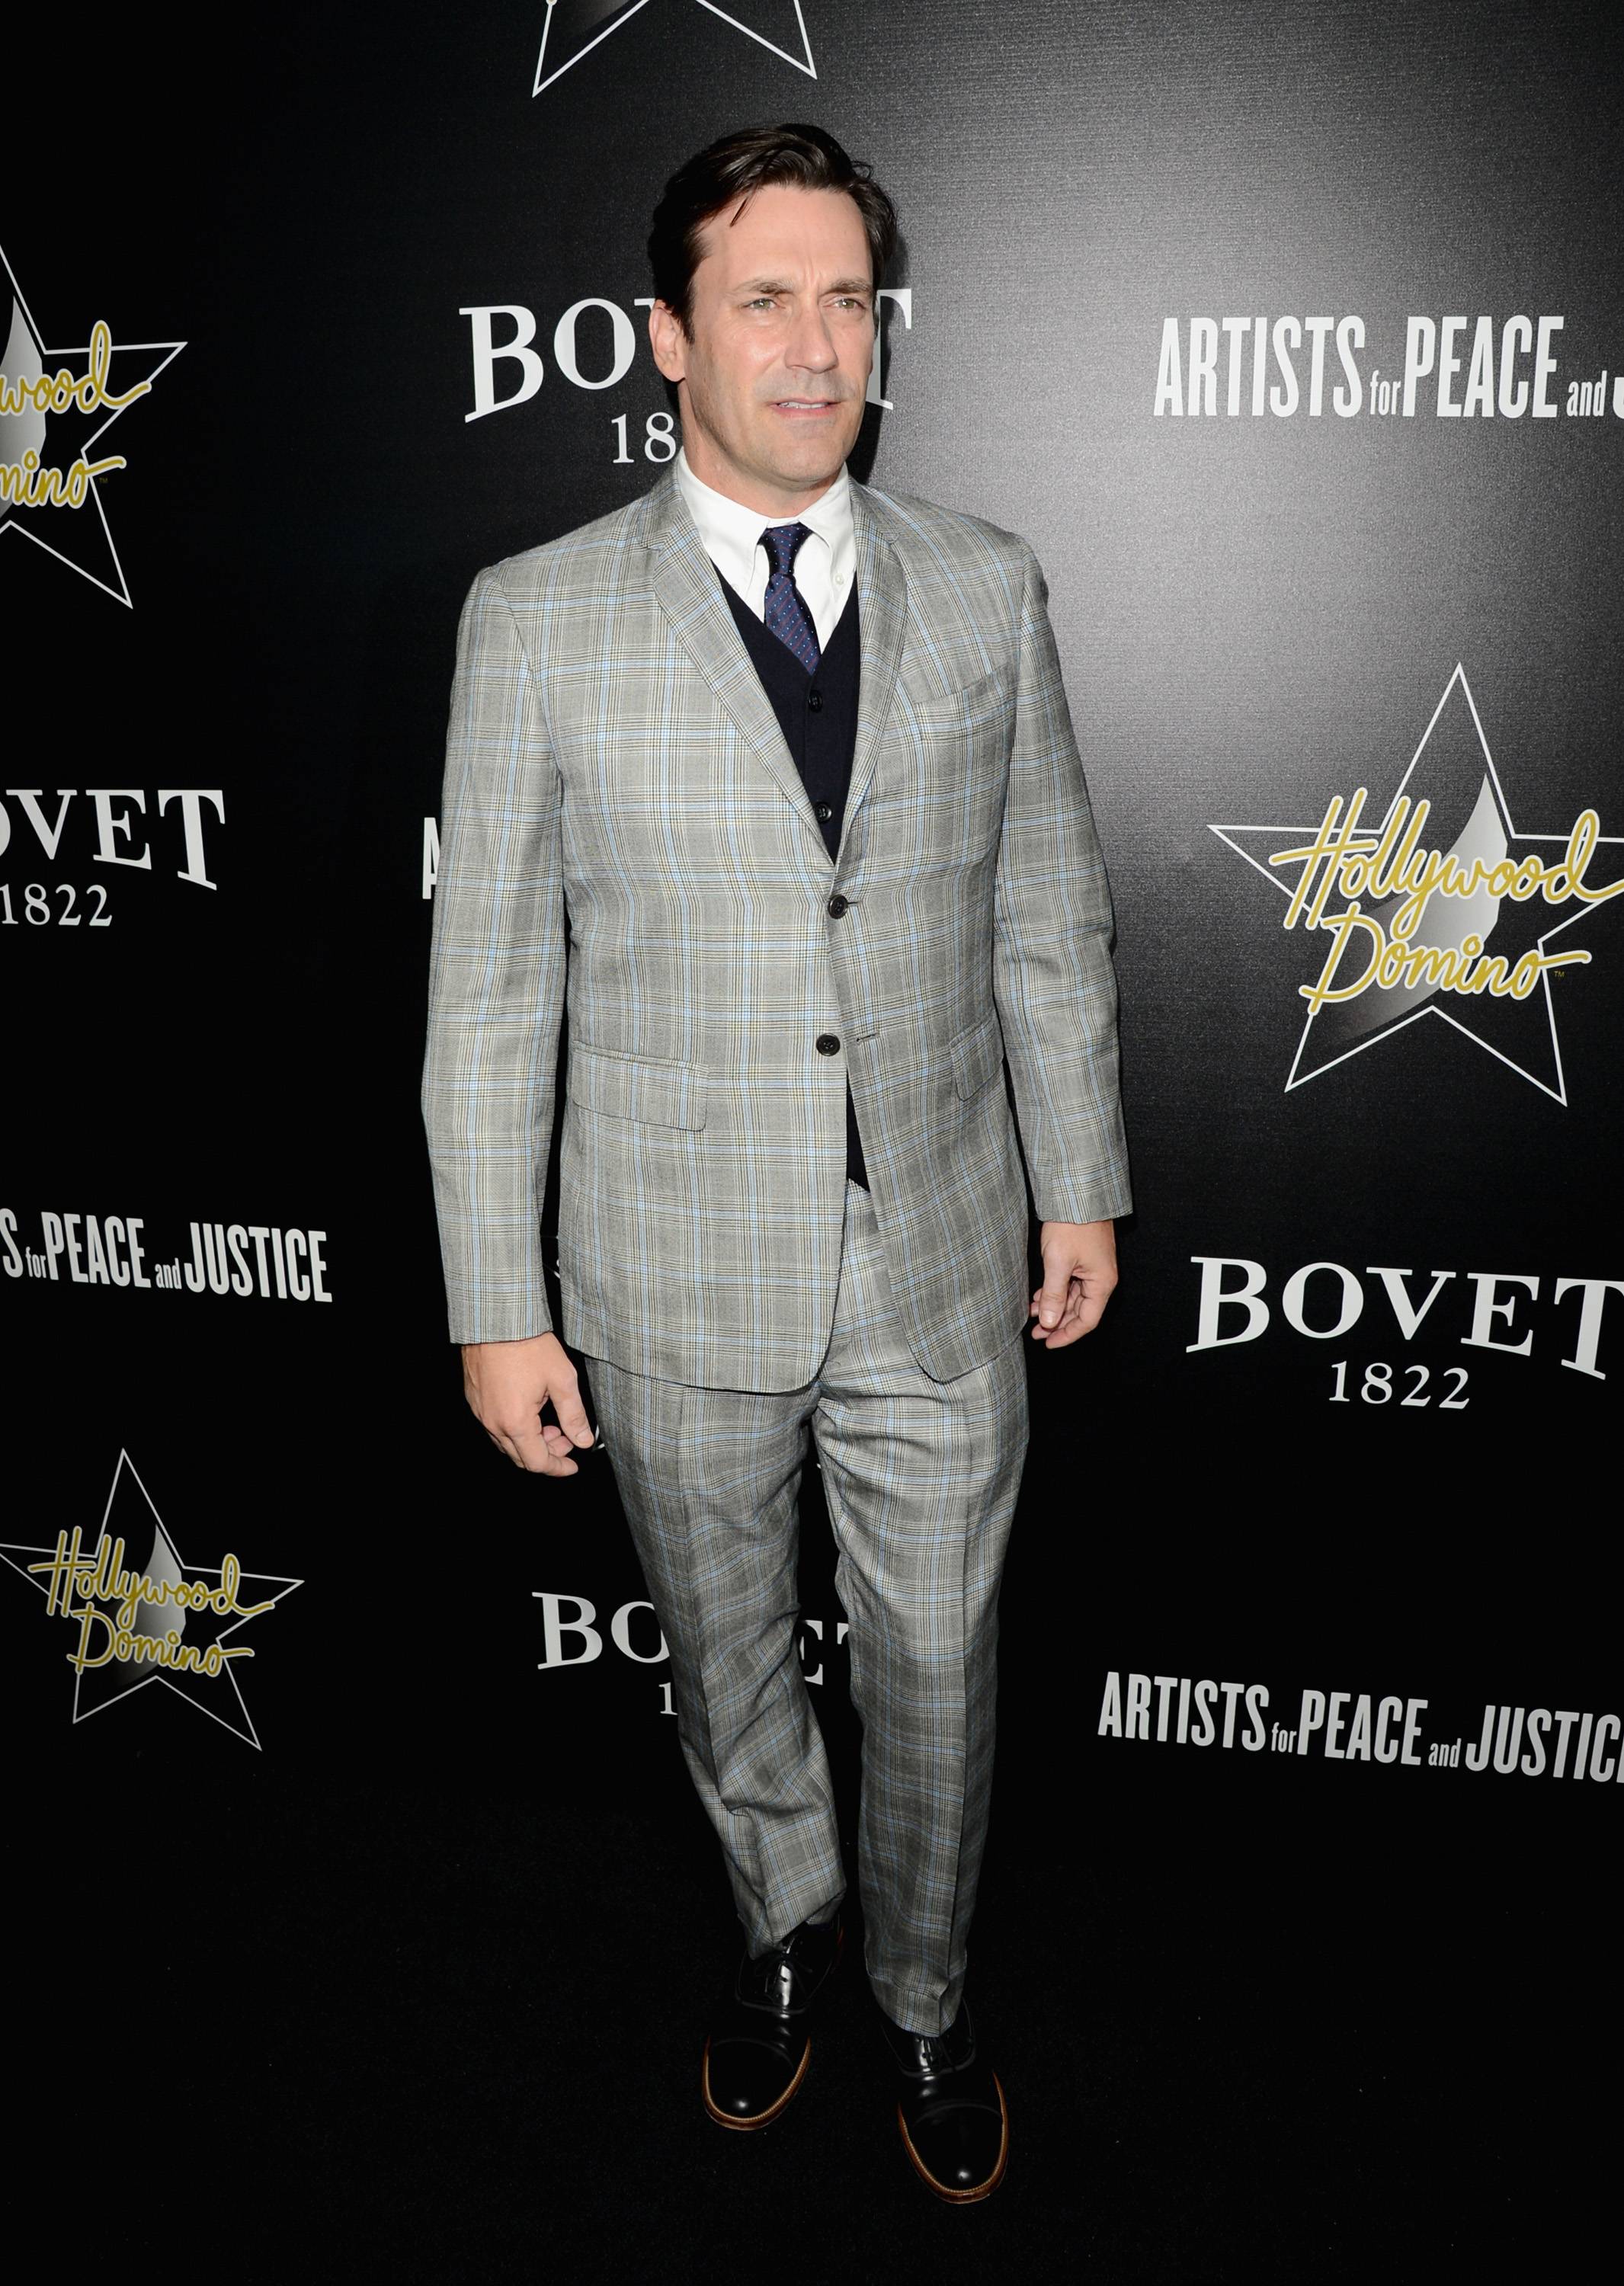 7th Annual Hollywood Domino And Bovet 1822 Gala Benefiting Artists For Peace And Justice - Red Carpet